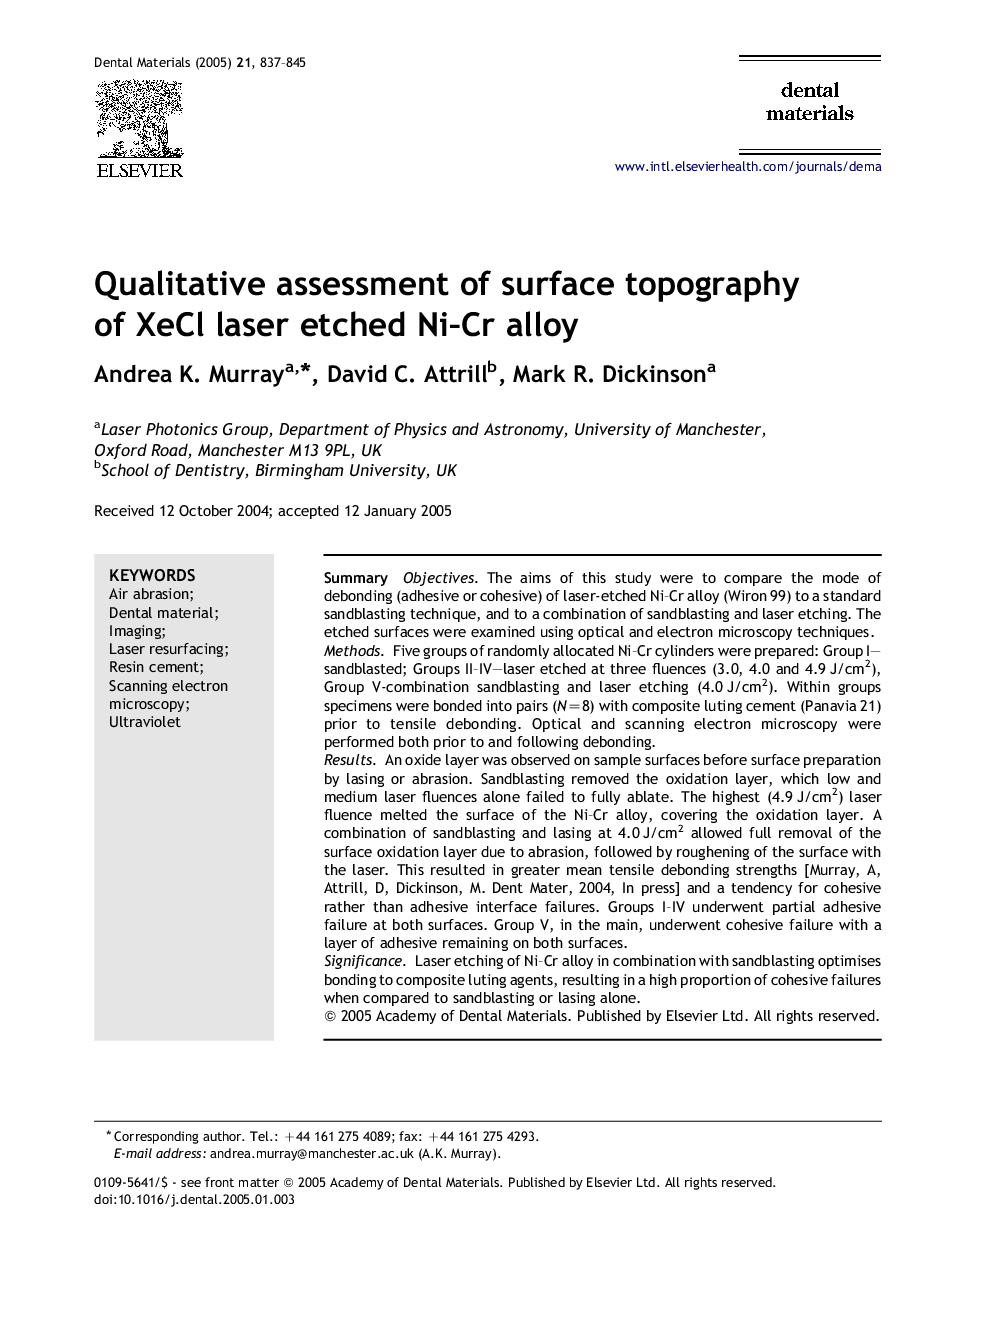 Qualitative assessment of surface topography of XeCl laser etched Ni-Cr alloy